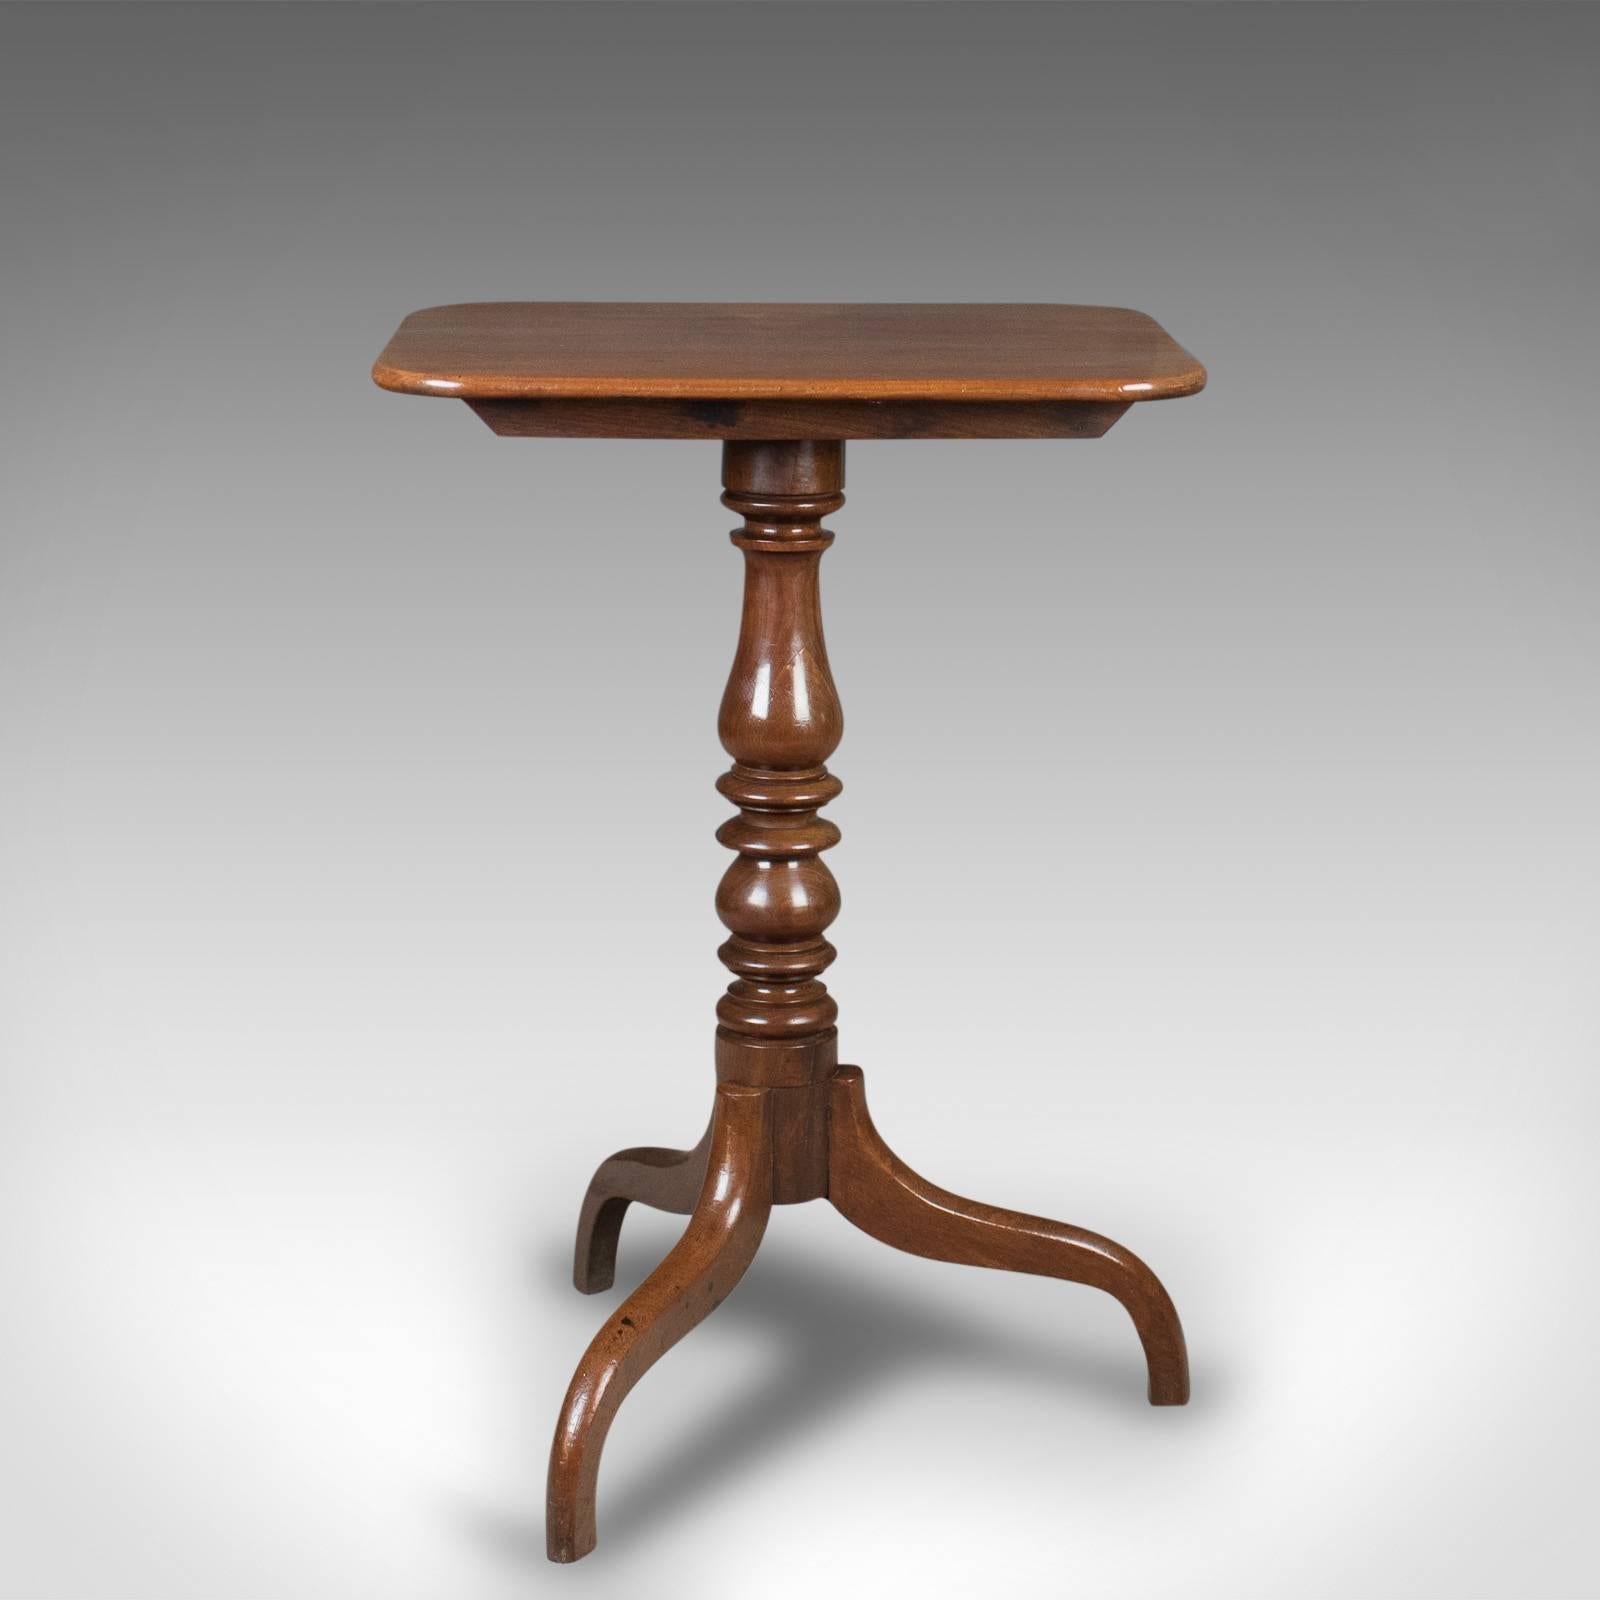 This is an antique, tilt-top wine table in mahogany, English, Georgian and dating to the early 19th century.

Classic tripod form with elegant down-swept legs
Robust quadruple turned baluster stem
Original iron catch with addition, hinged for